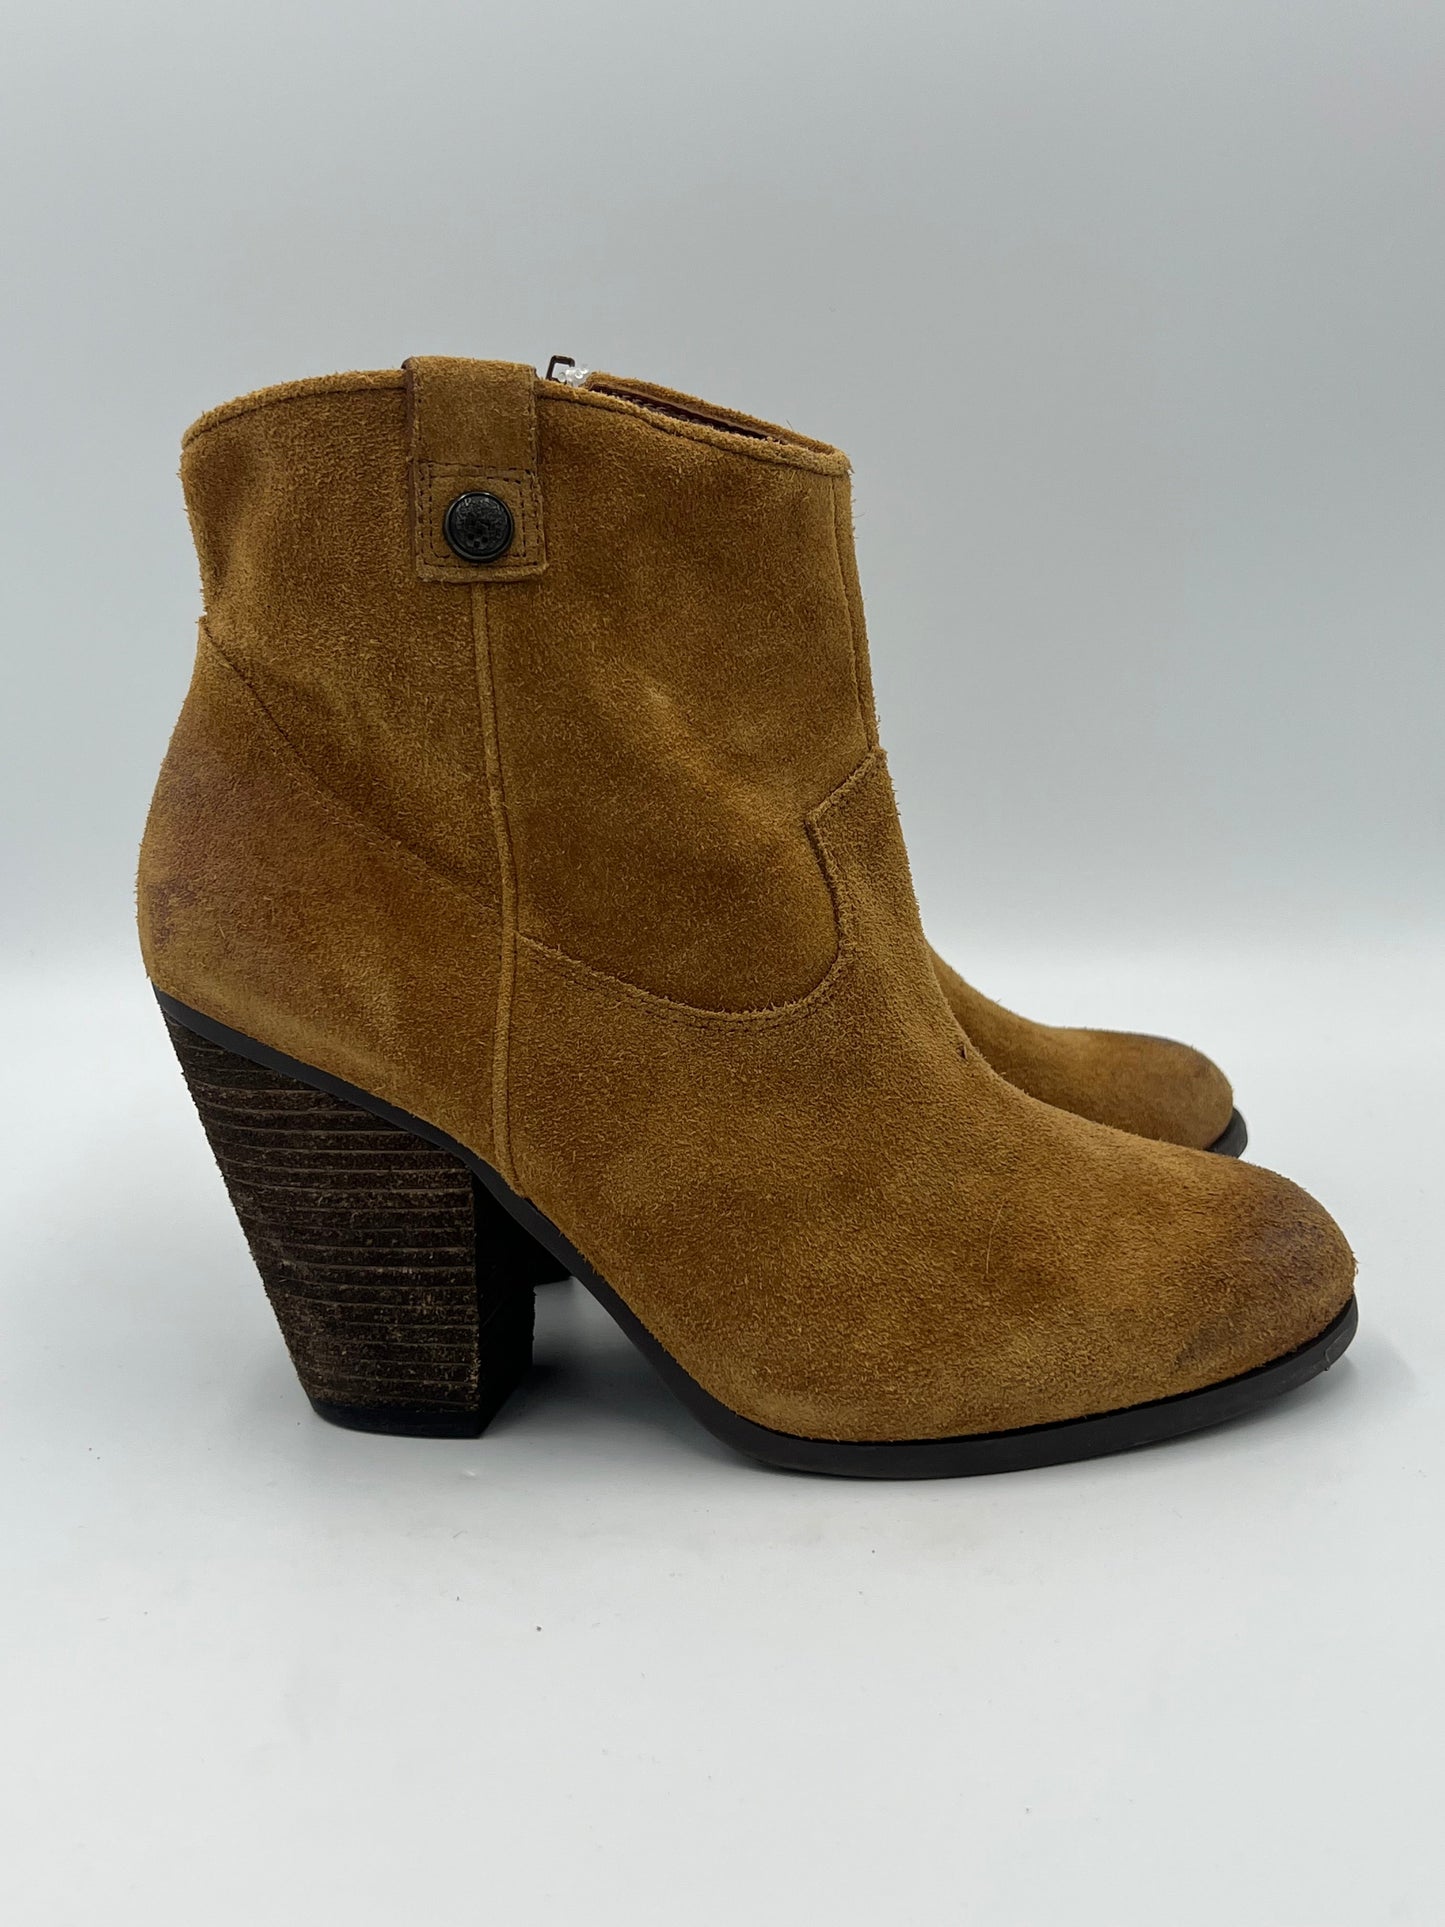 Boots Ankle Heels By Vince Camuto  Size: 8.5